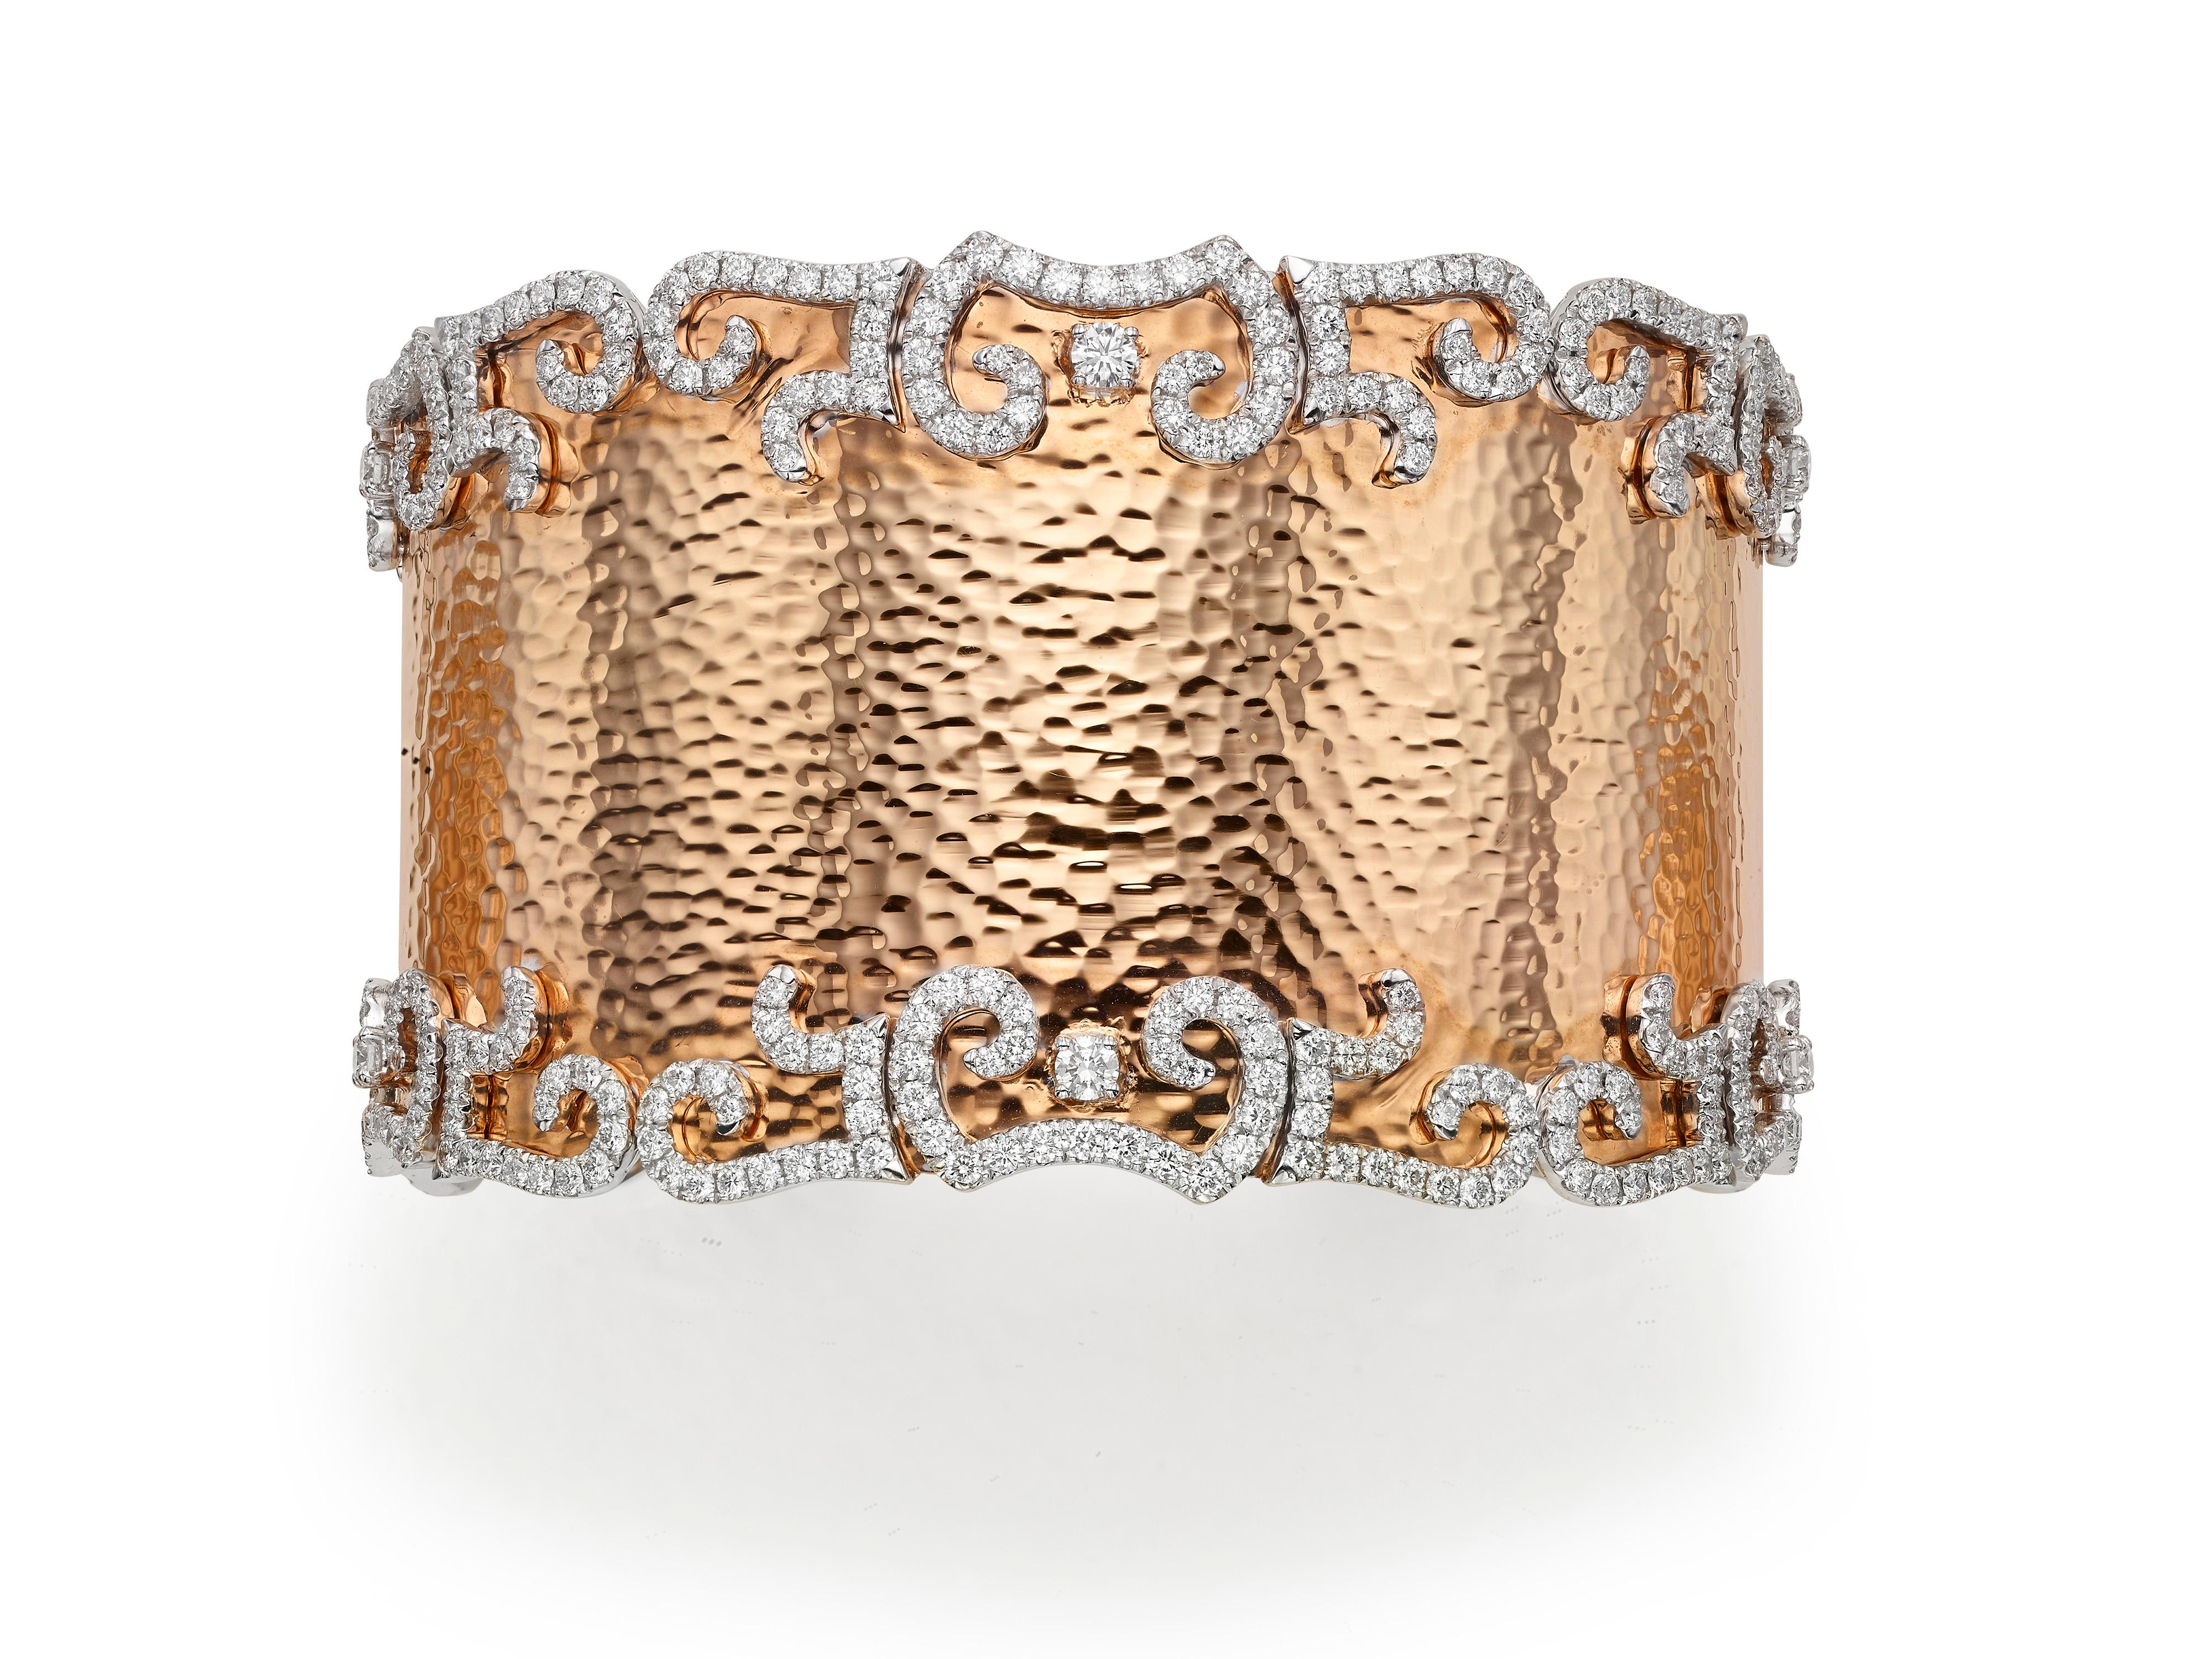 Butani’s rose gold and diamond cuff bangle is the perfect gift to celebrate a special occasion.  Made from hammered 18K rose gold, the cuff is detailed with 7.65 carats of diamonds to resemble a magnificent floral wreath.

Composition:
18K Rose